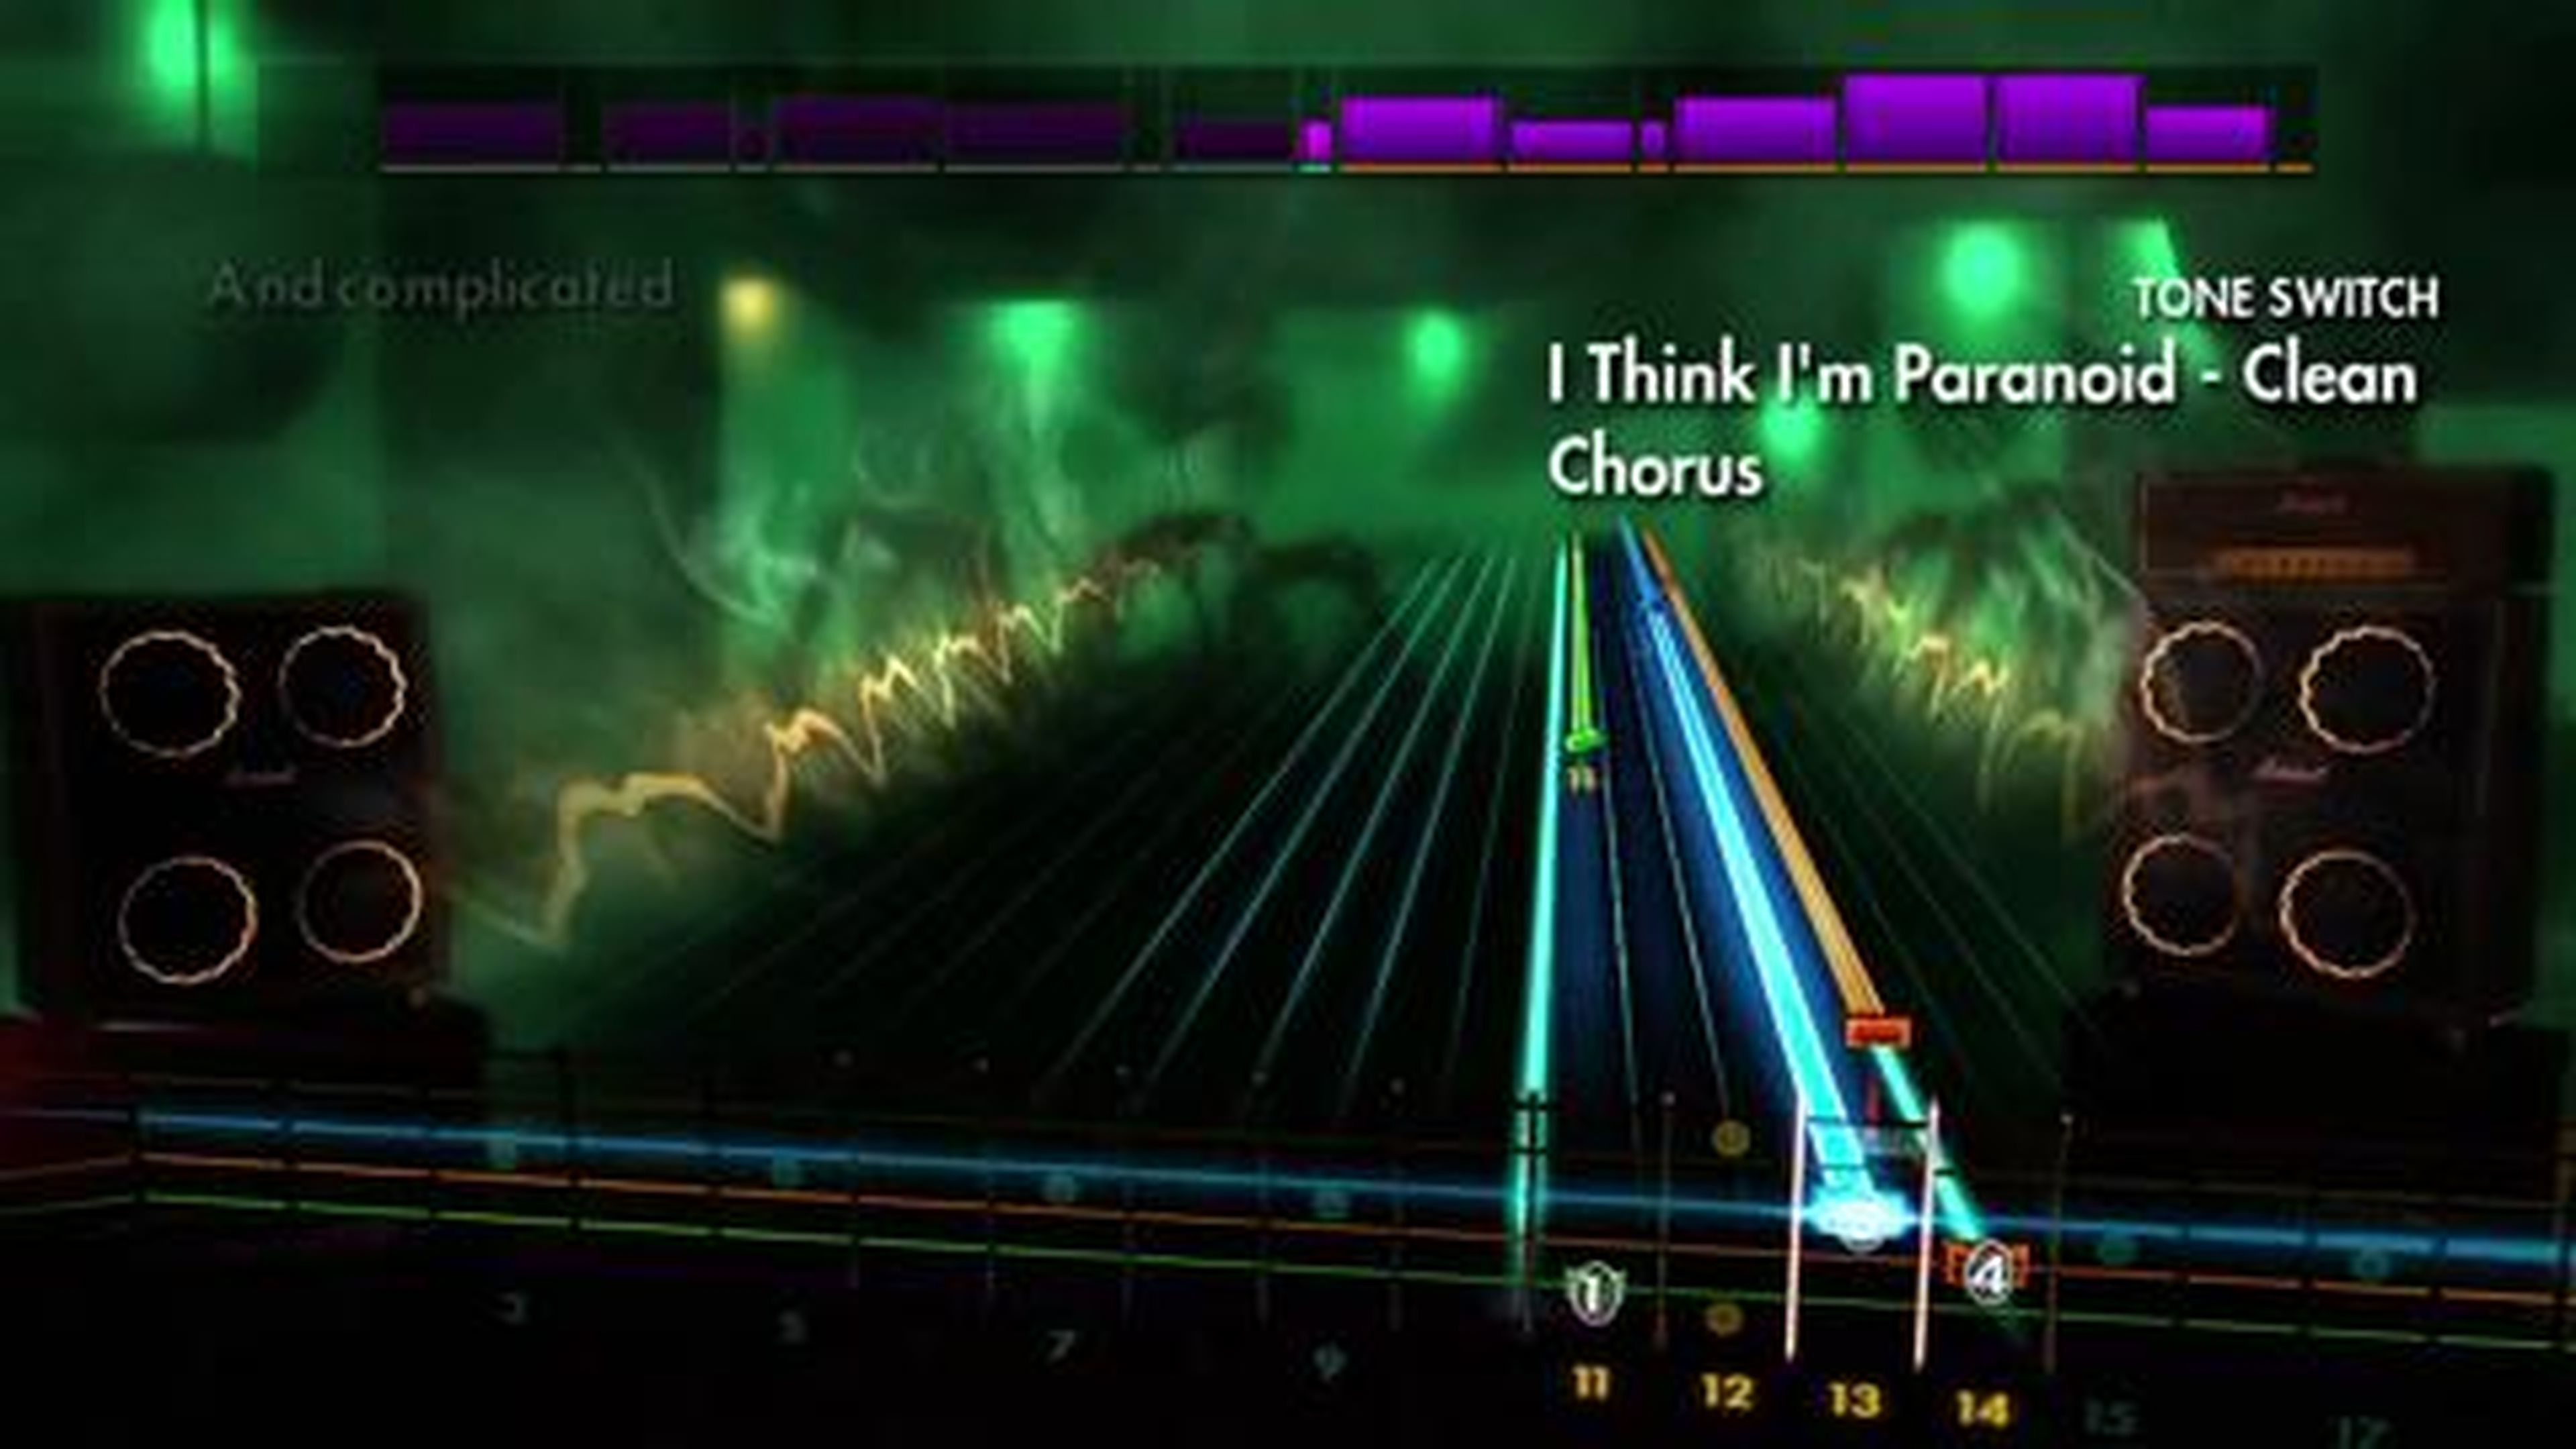 Rocksmith 2014 Edition - Garbage songs pack Trailer [Europe]